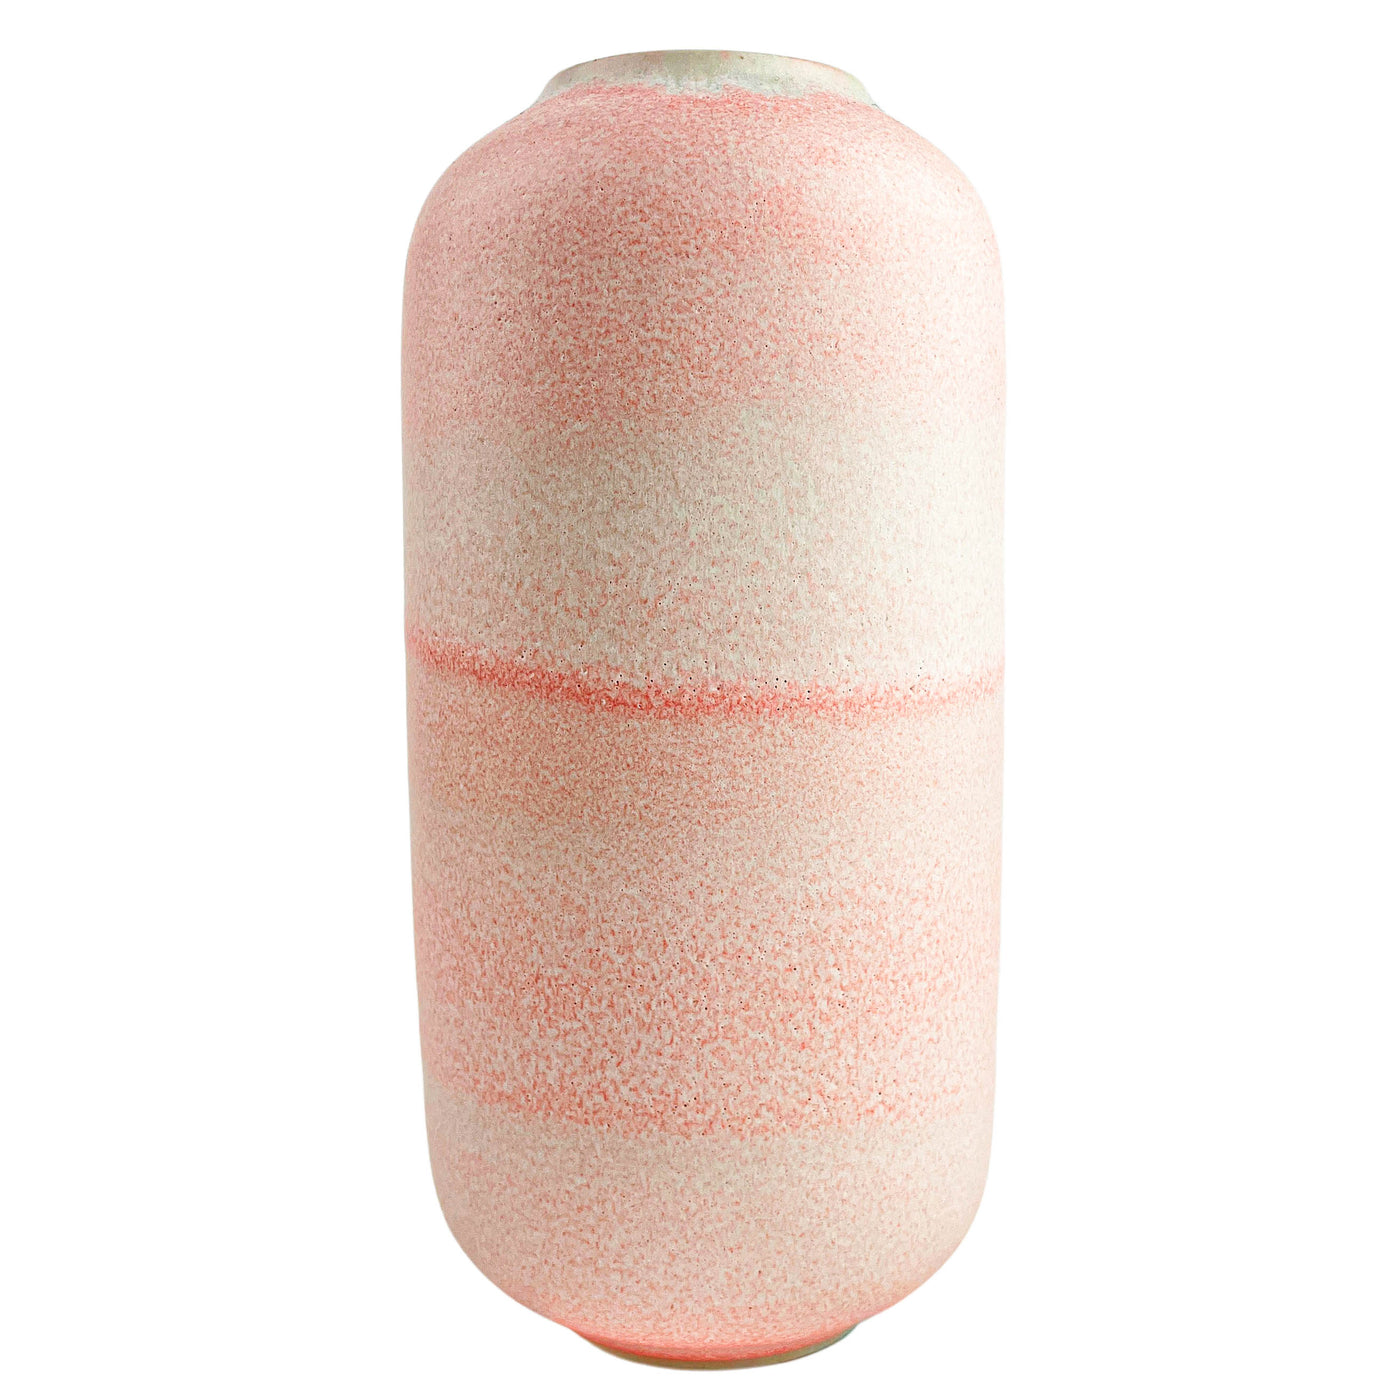 Tortus Classic Vase in Pink - Discounts on Tortus at UAL